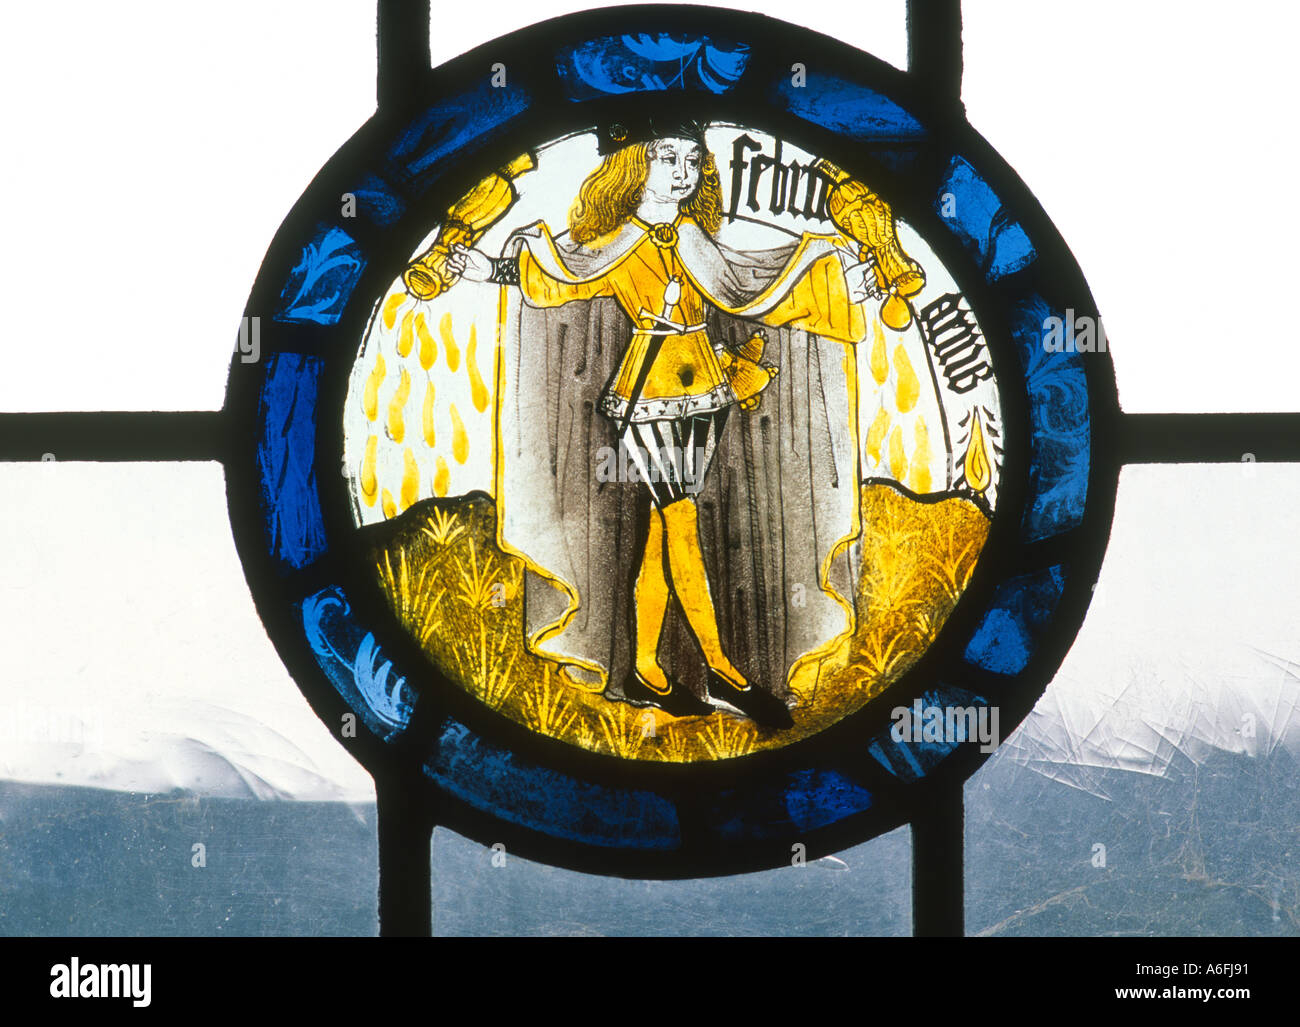 Medieval Stained Glass Roundel Audley End Aquarius water carrier February 15th century art history heritage costume medieval Stock Photo